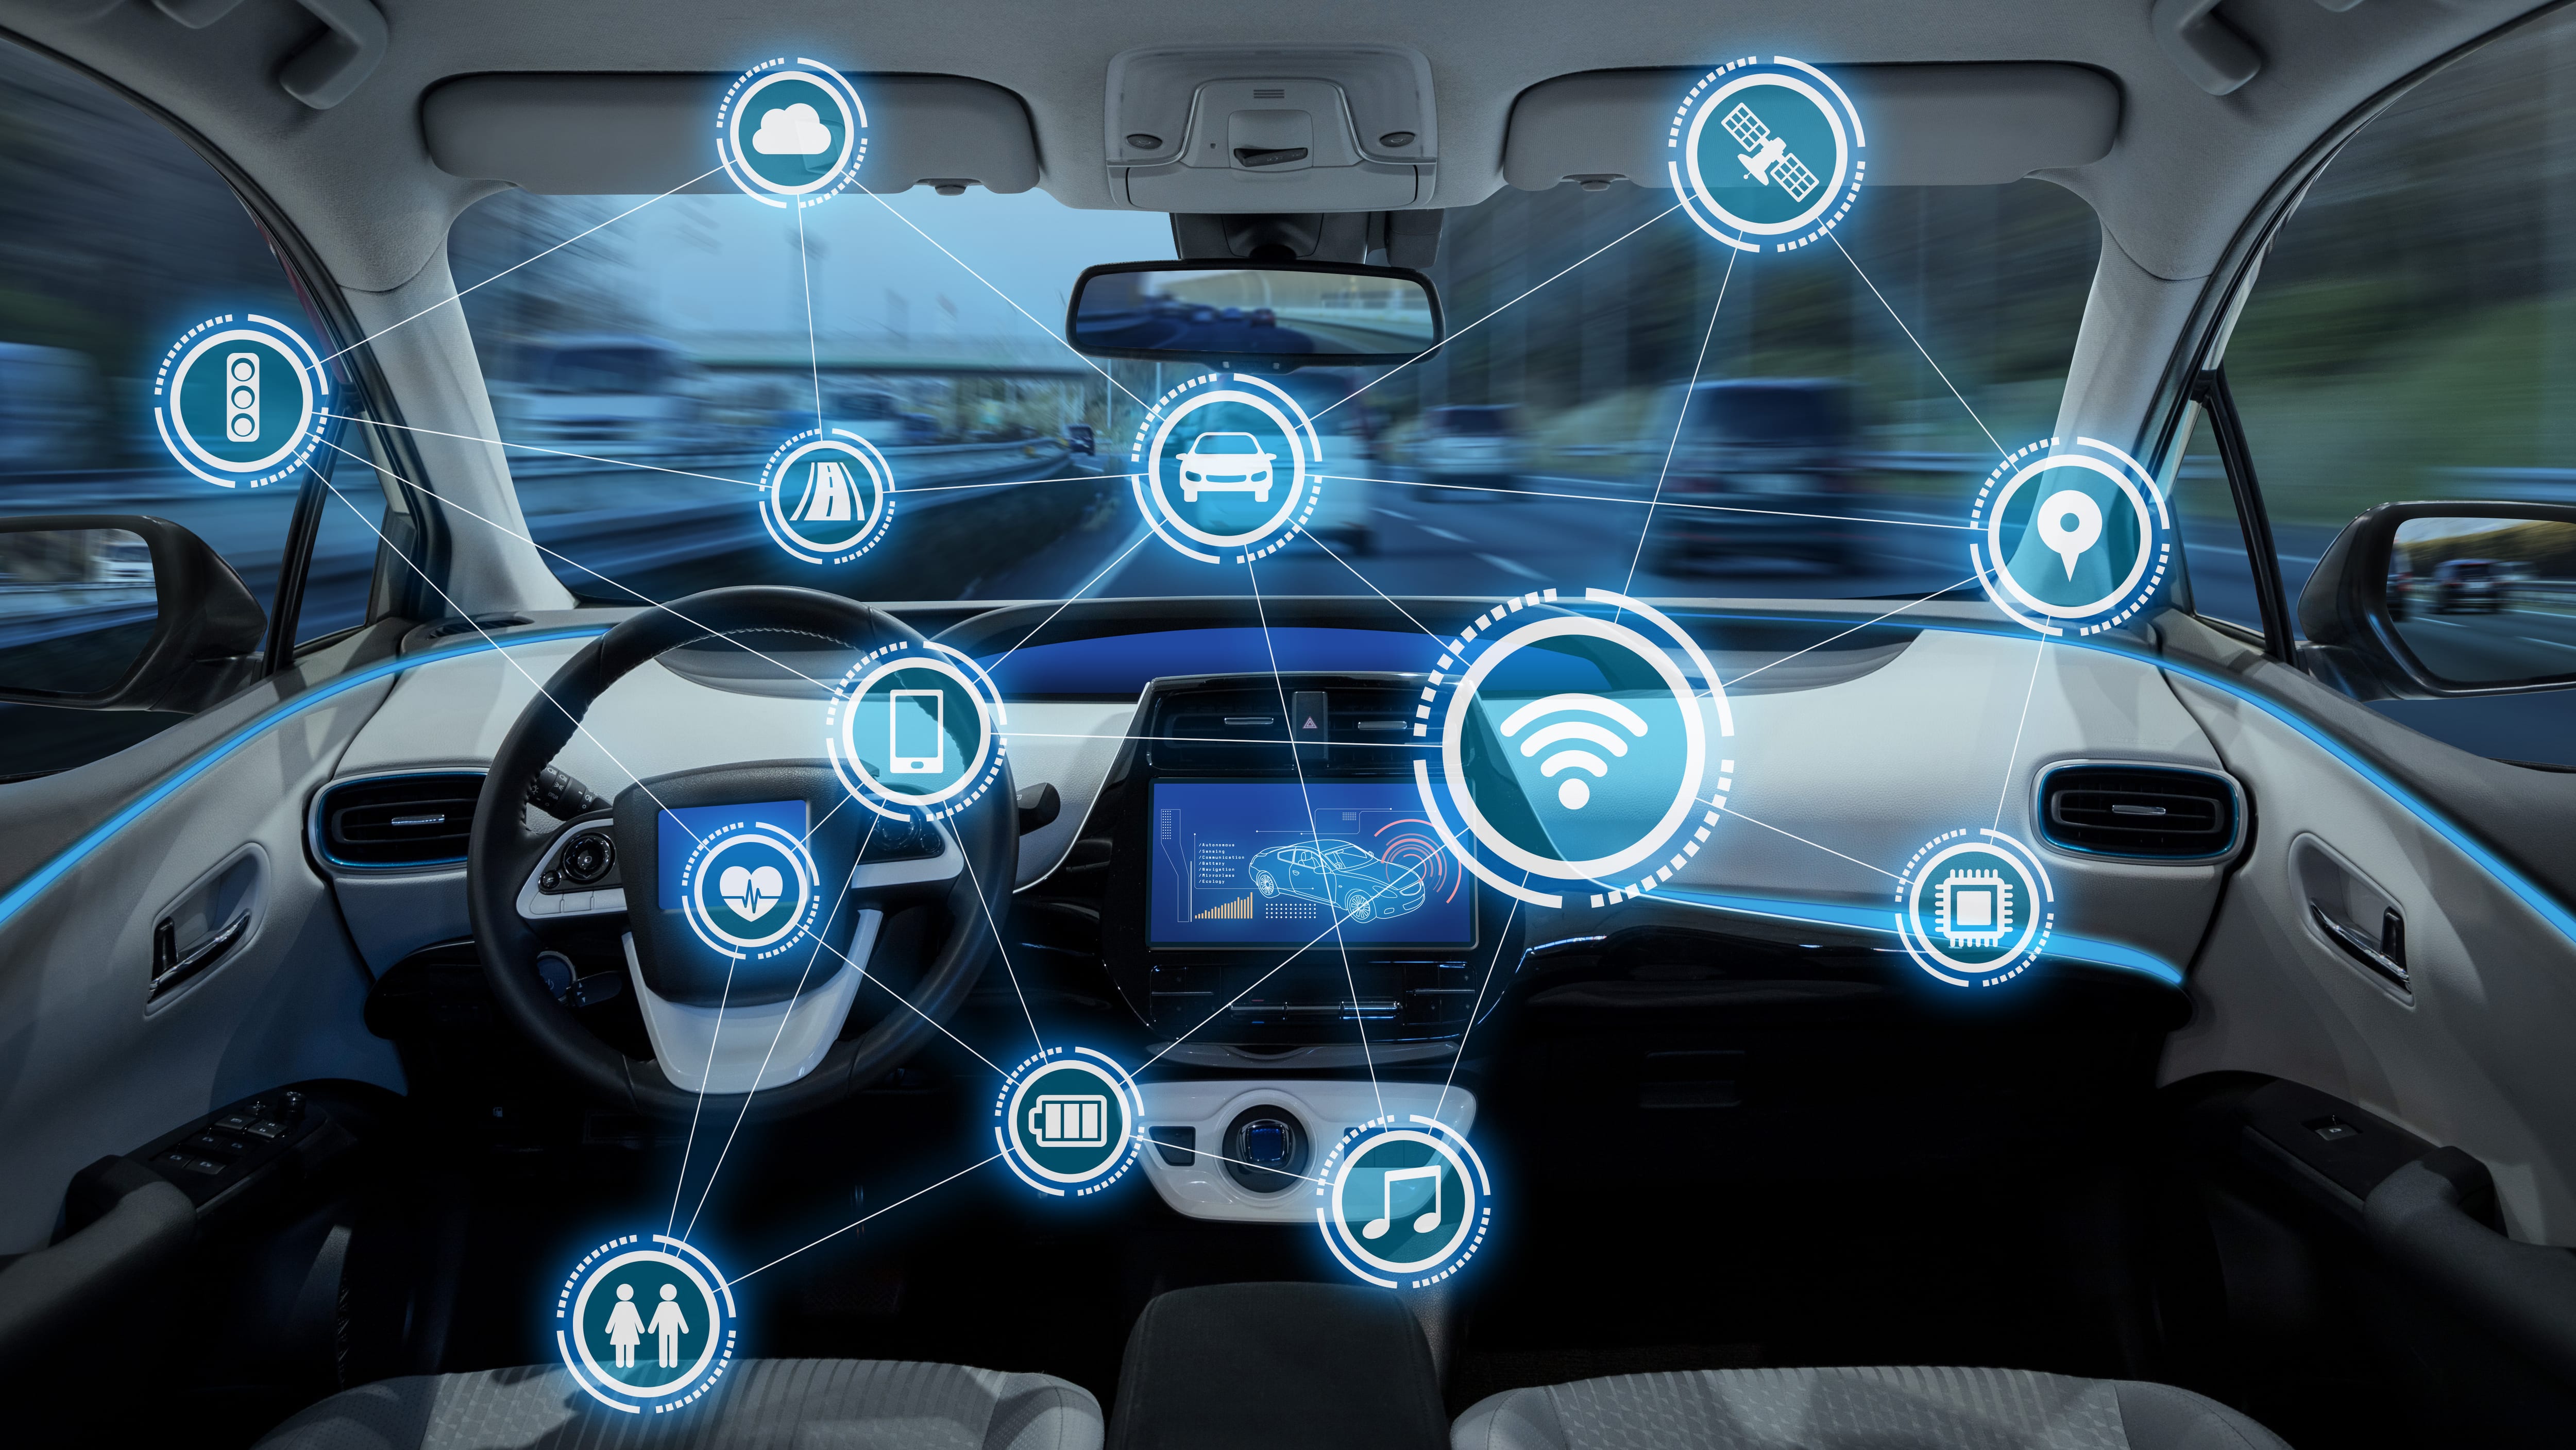 Connected Vehicles to Surpass 367 Million Globally by 2027, as 5G Unlocks Data-heavy Use Cases